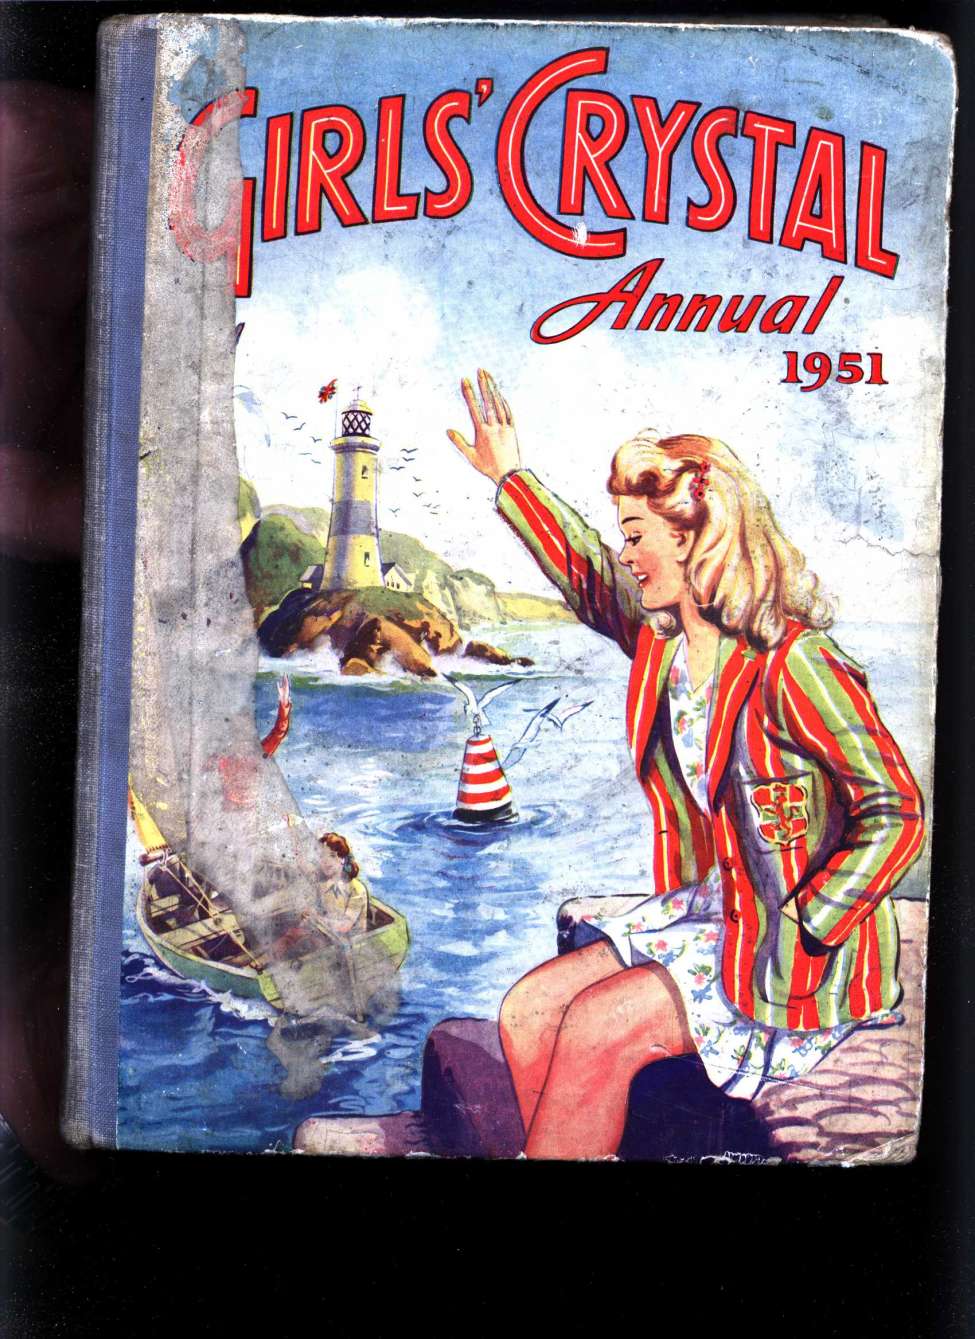 Comic Book Cover For Girls' Crystal Annual 1951